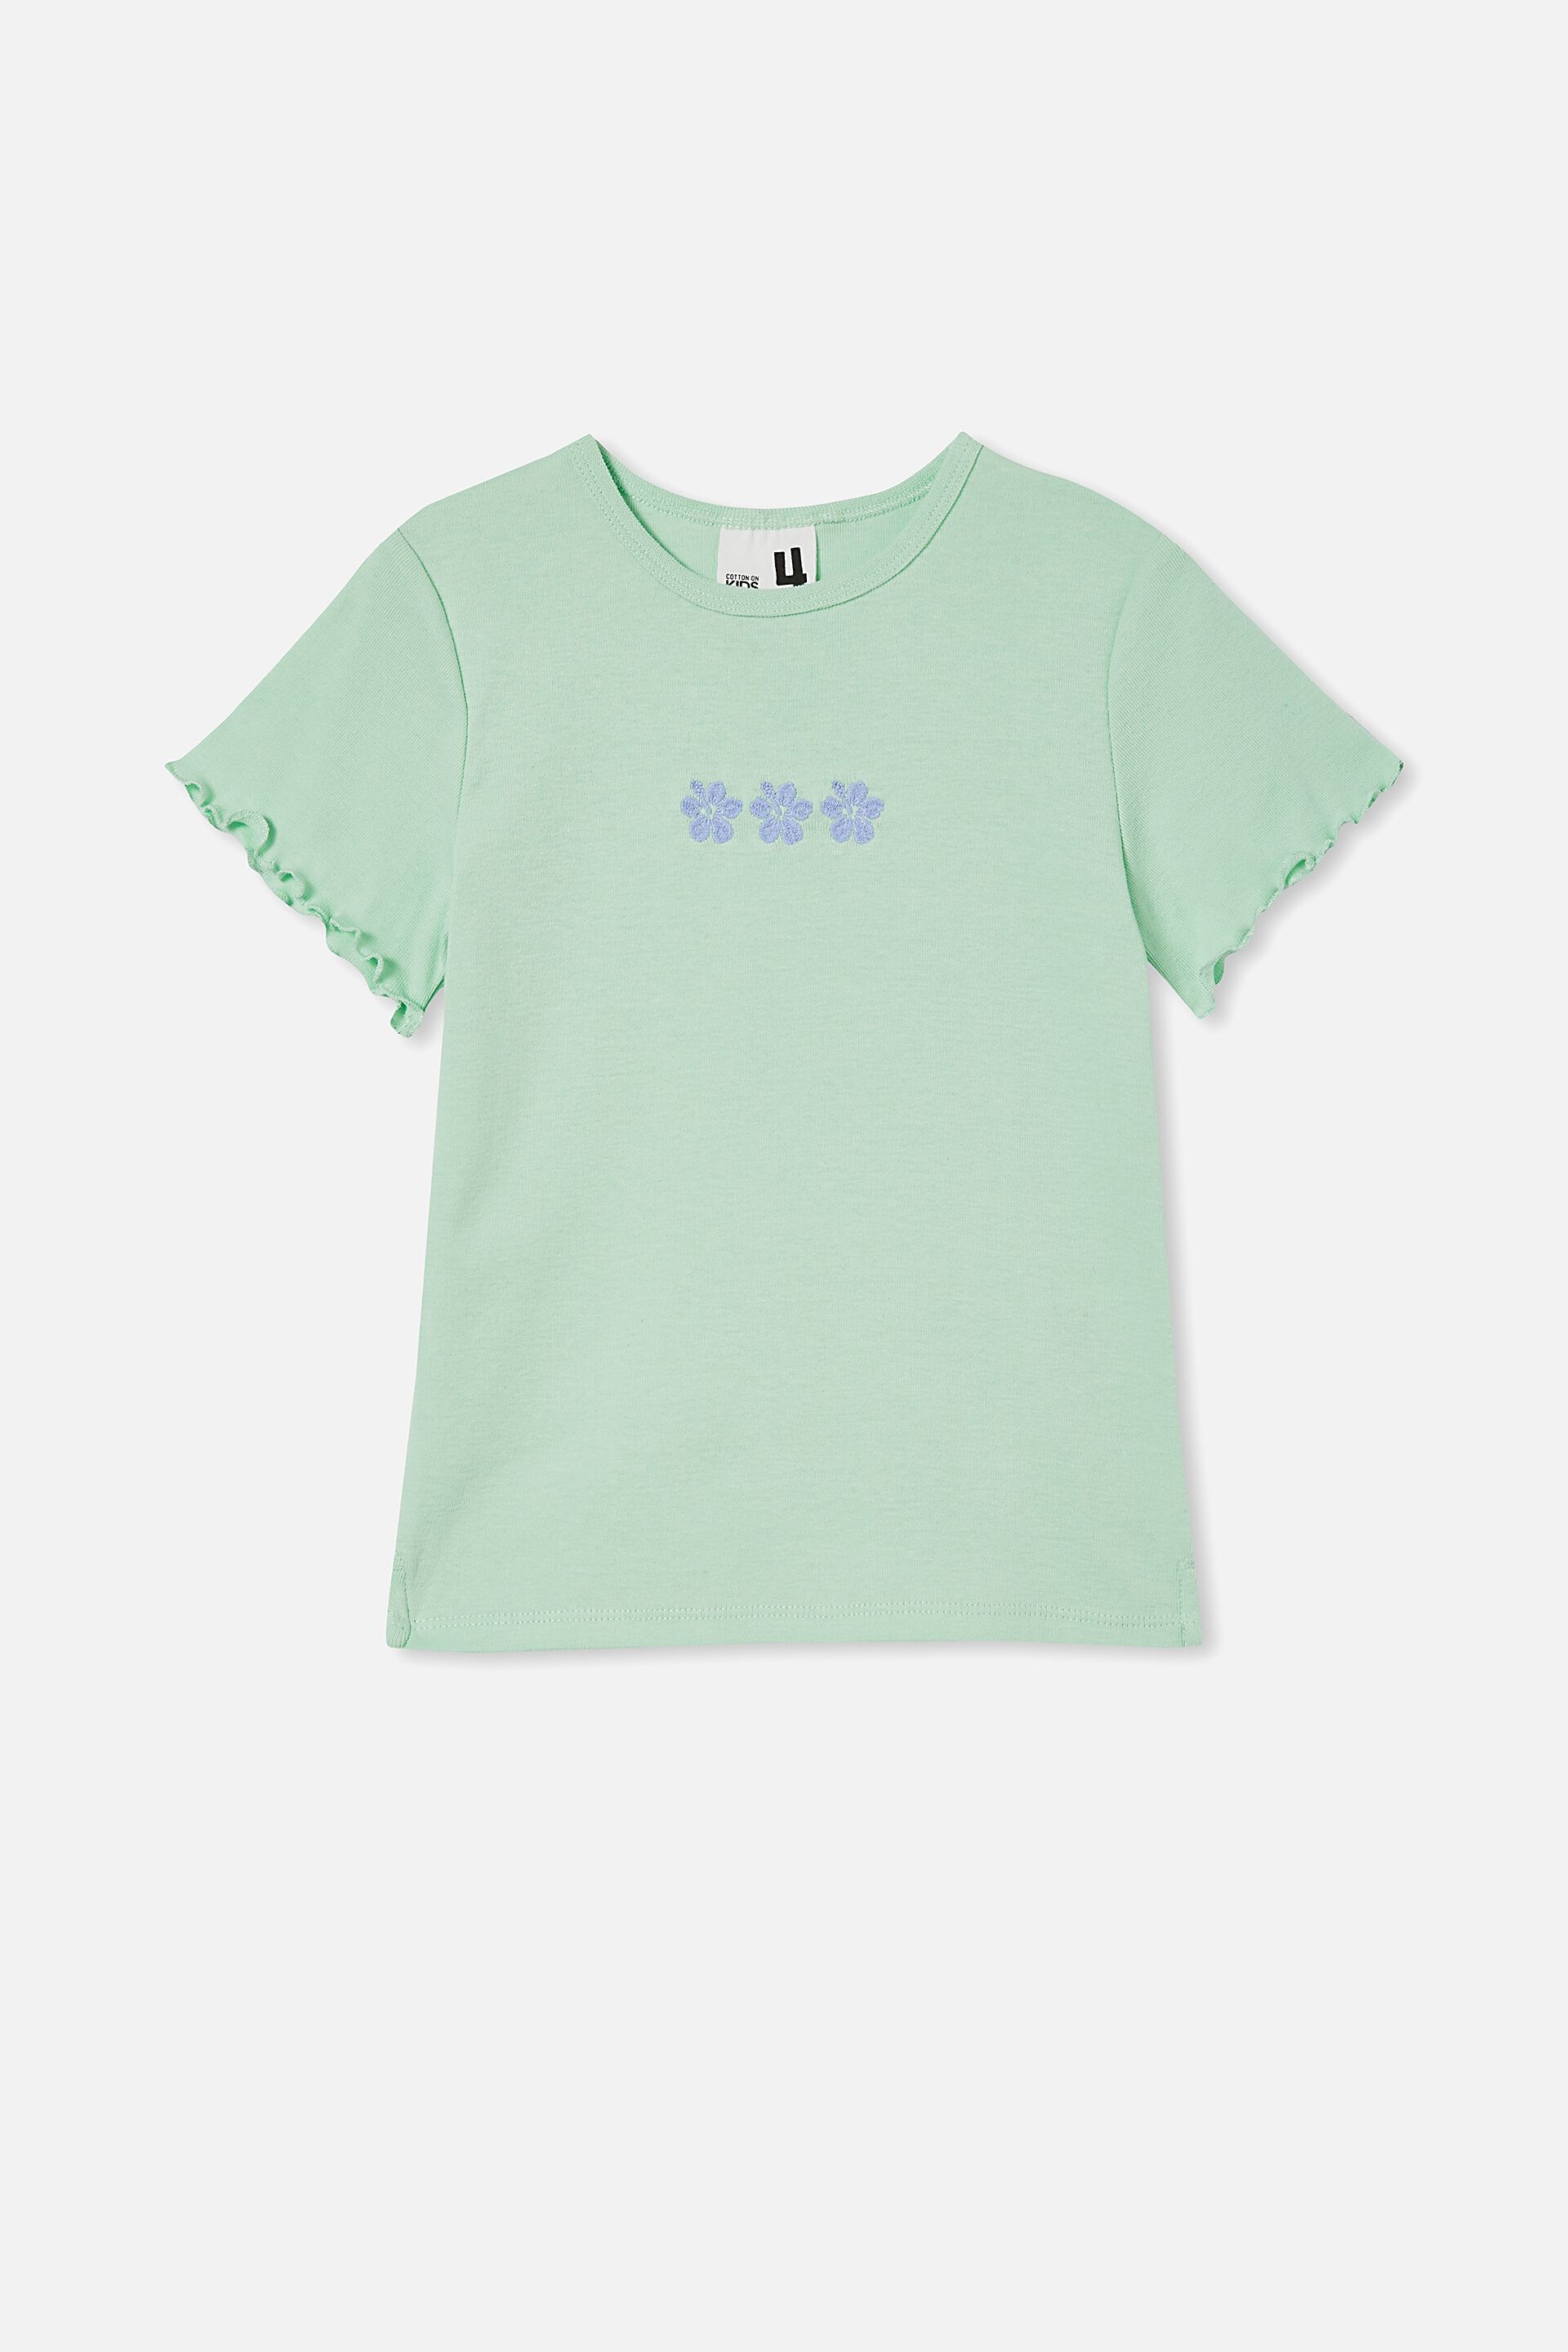 Girls 2-14 Tops & T-Shirts | Amelia Short Sleeve Top - OW99328